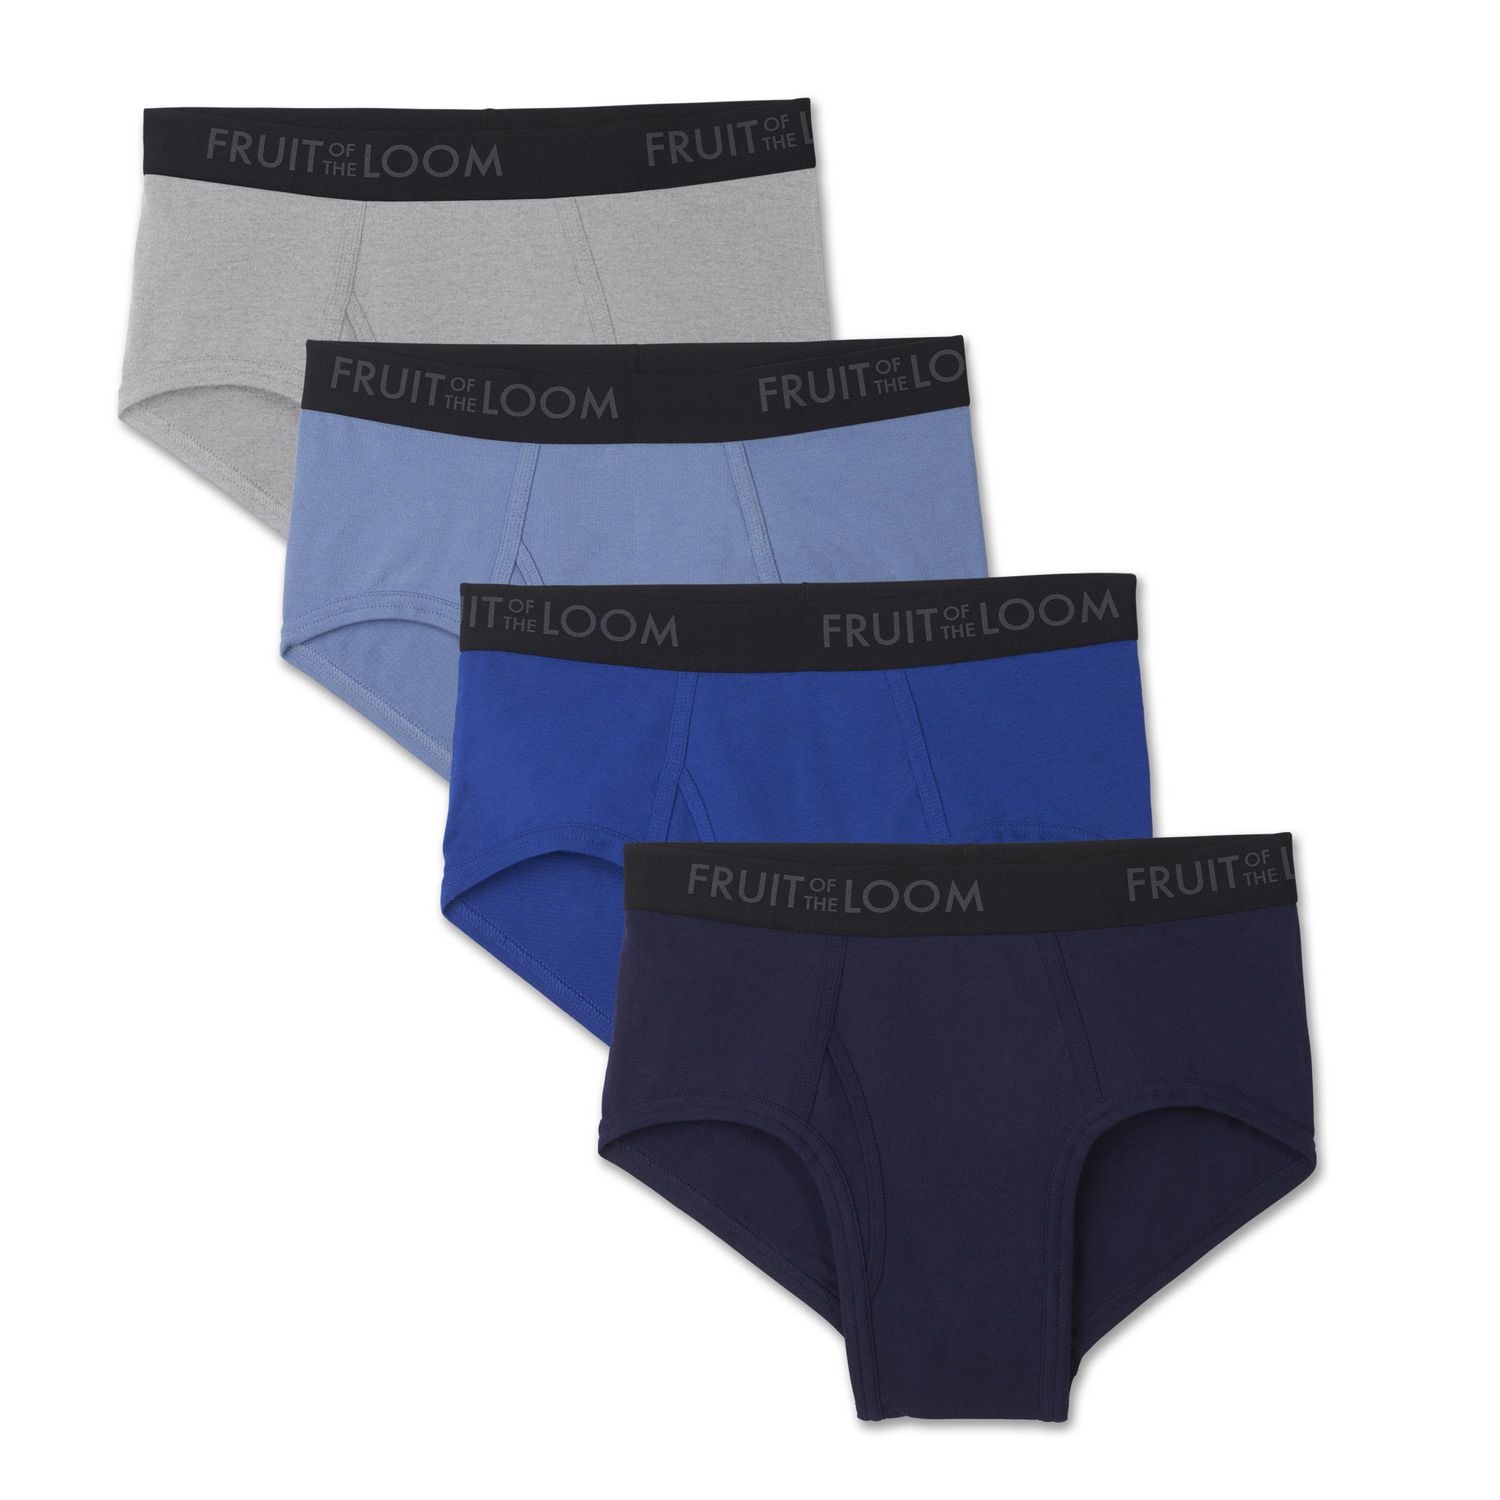 Fruit of the Loom Men's Breathable Micro-Mesh Assorted Color Briefs, 4 Pack  